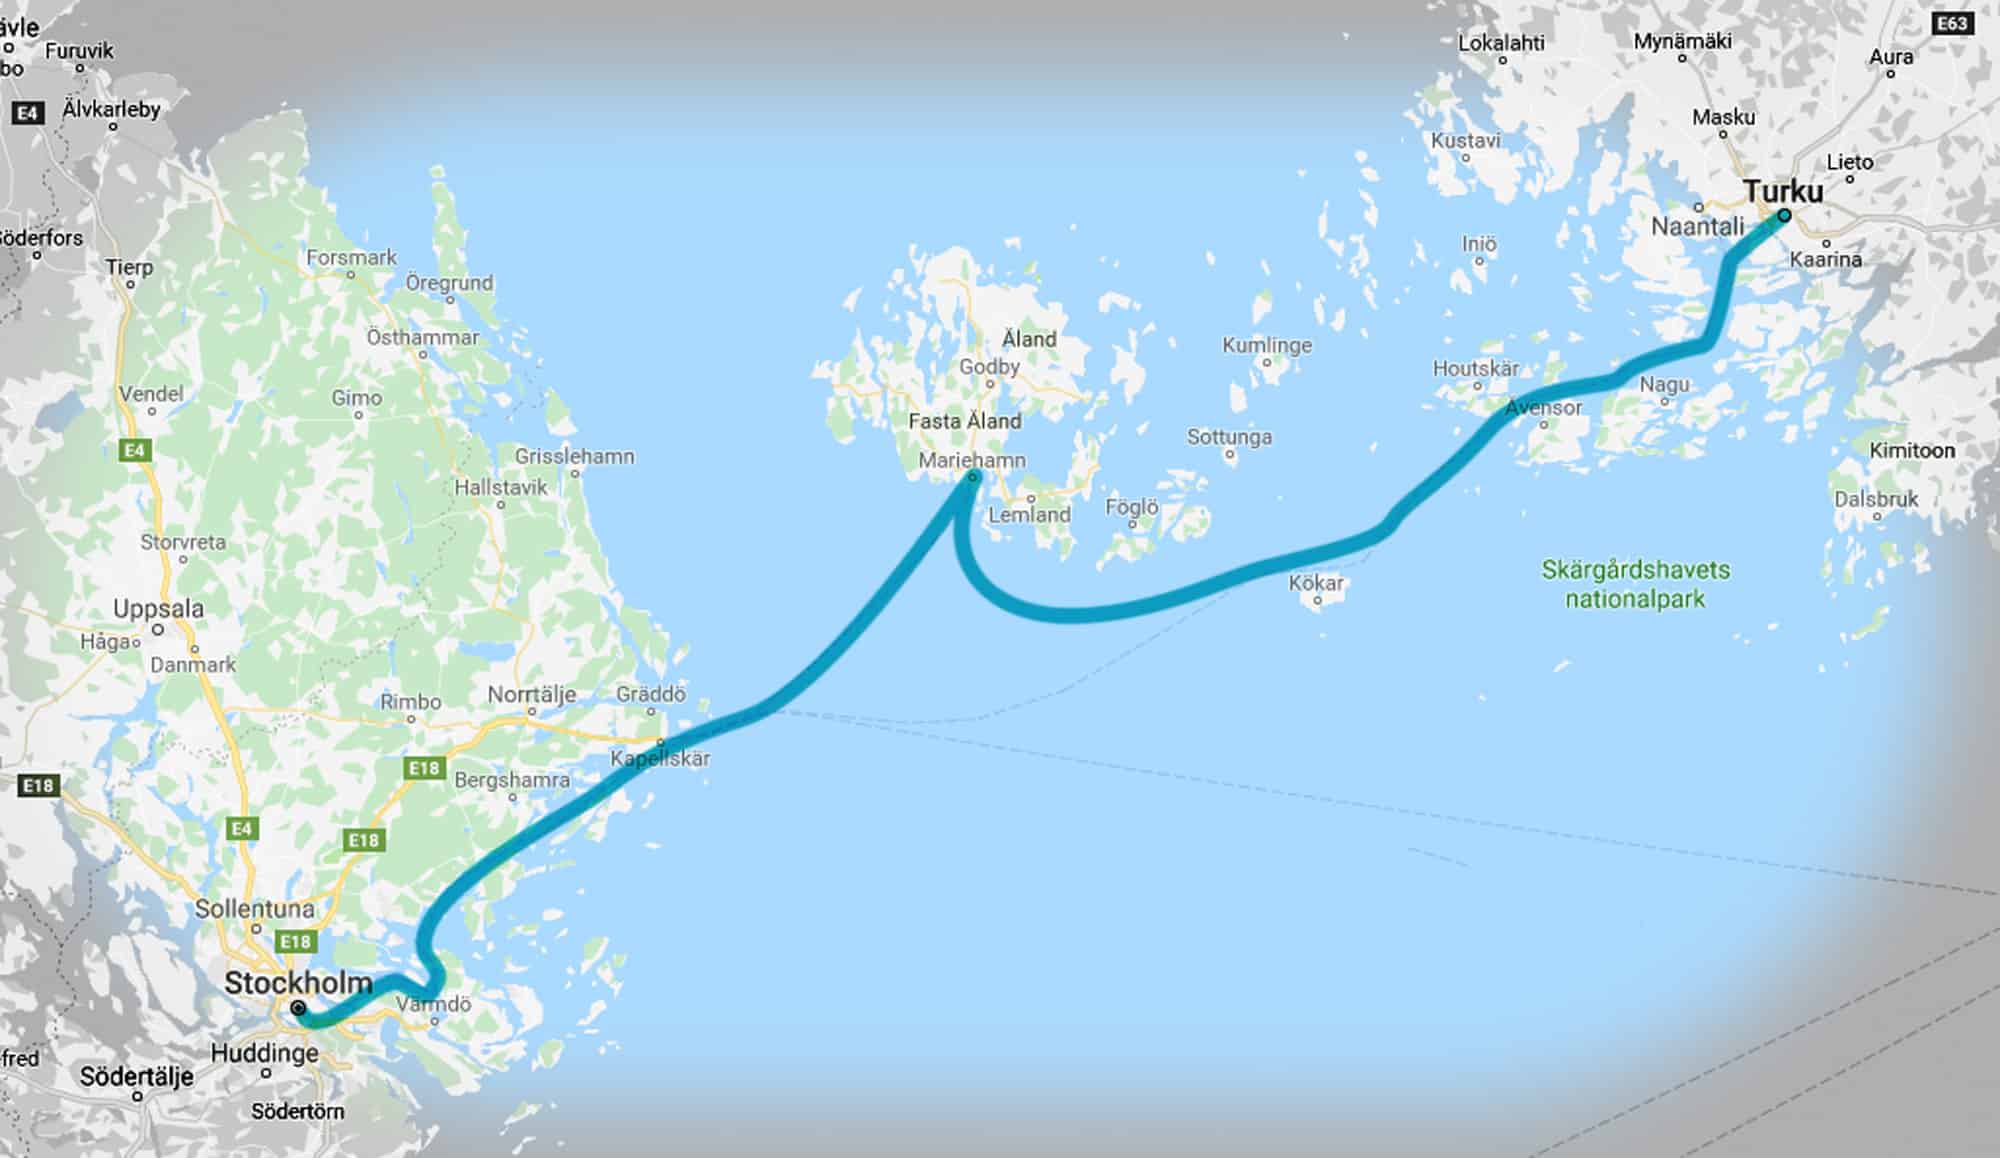 turku-to-stockholm-by-ferry-viking-line-review-and-experience-rail-cc